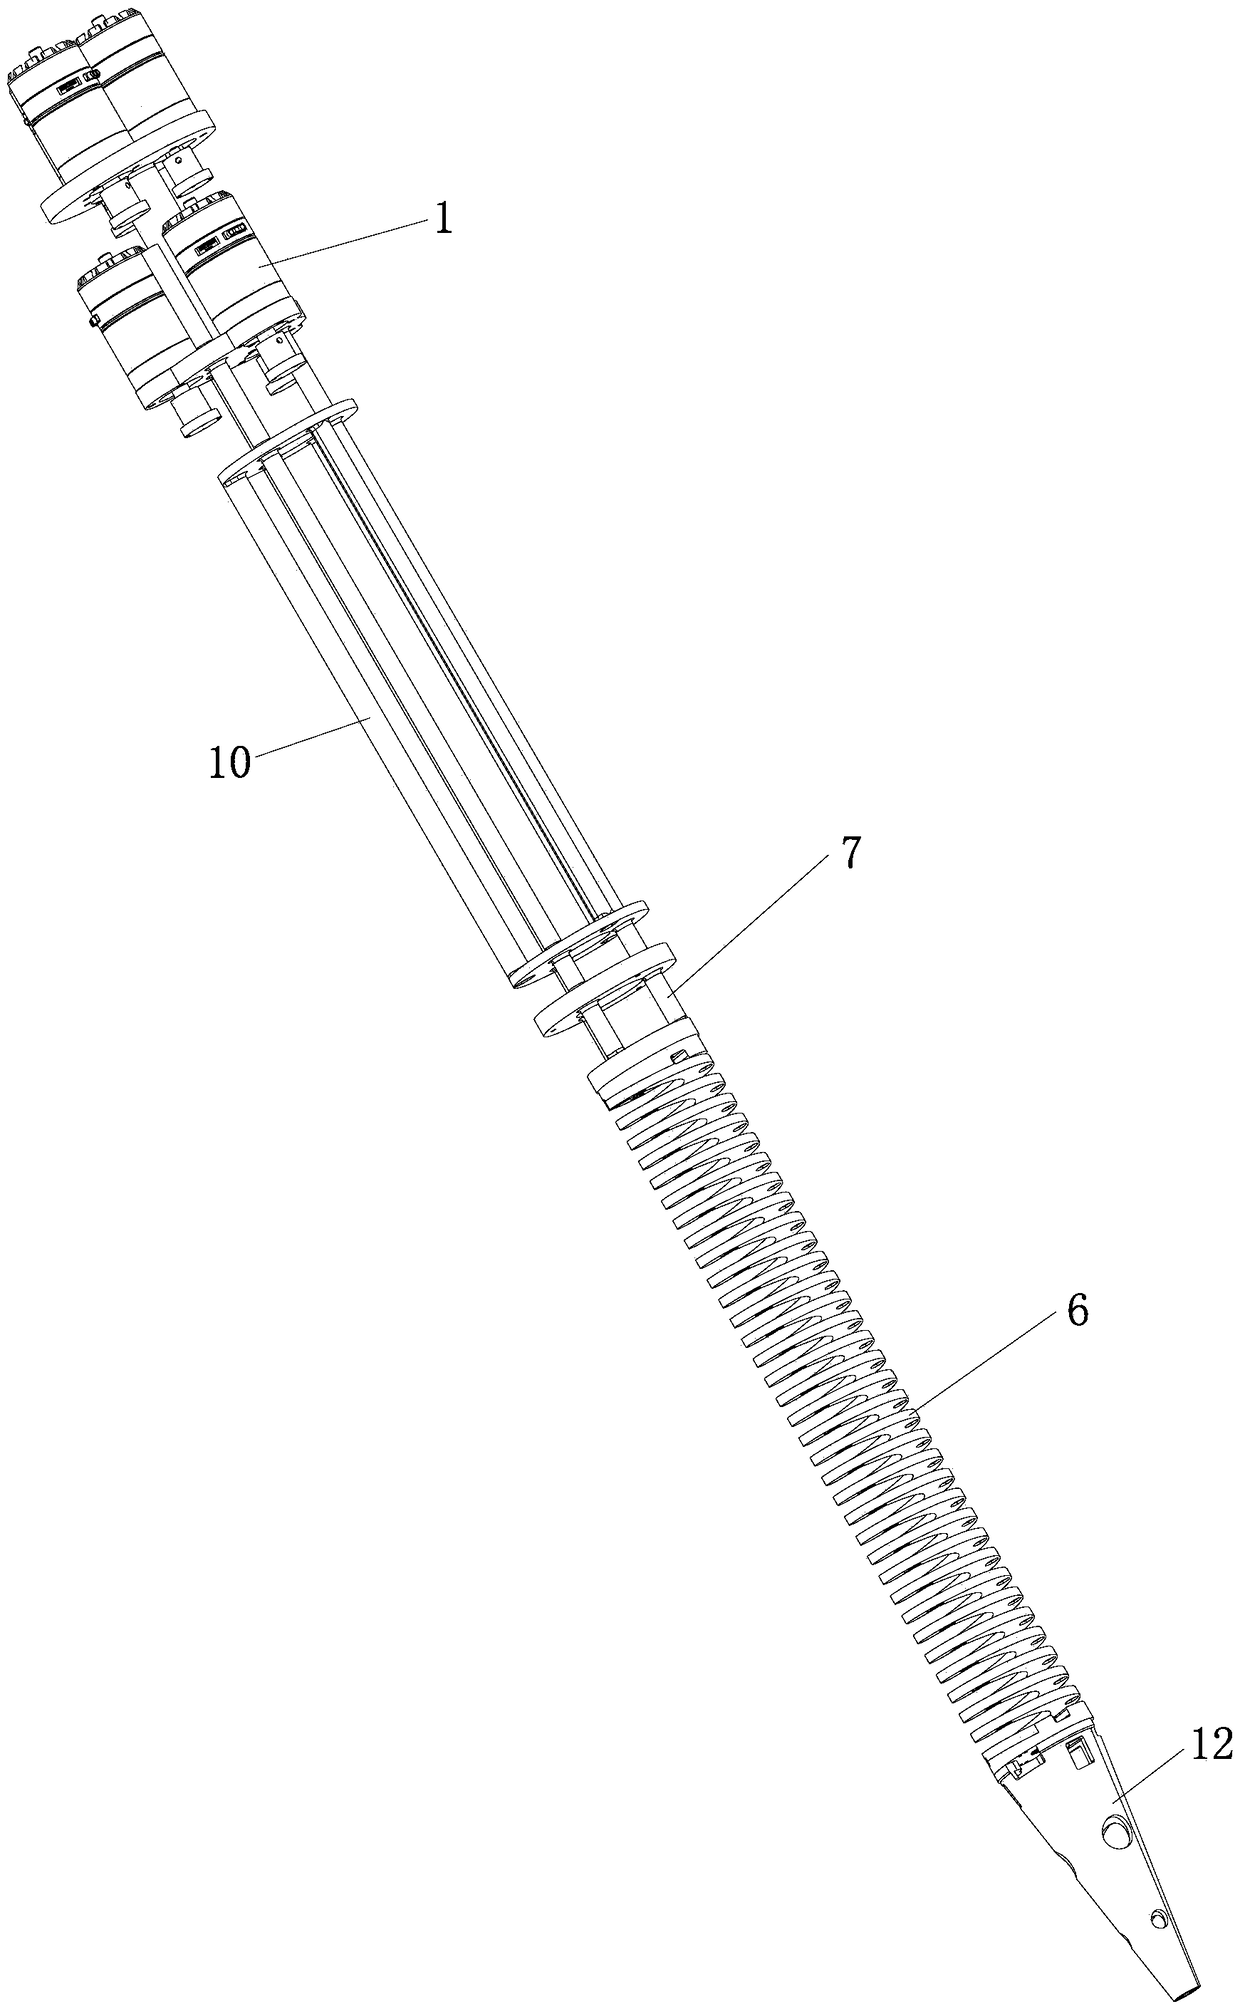 Two-section flexible operation arm